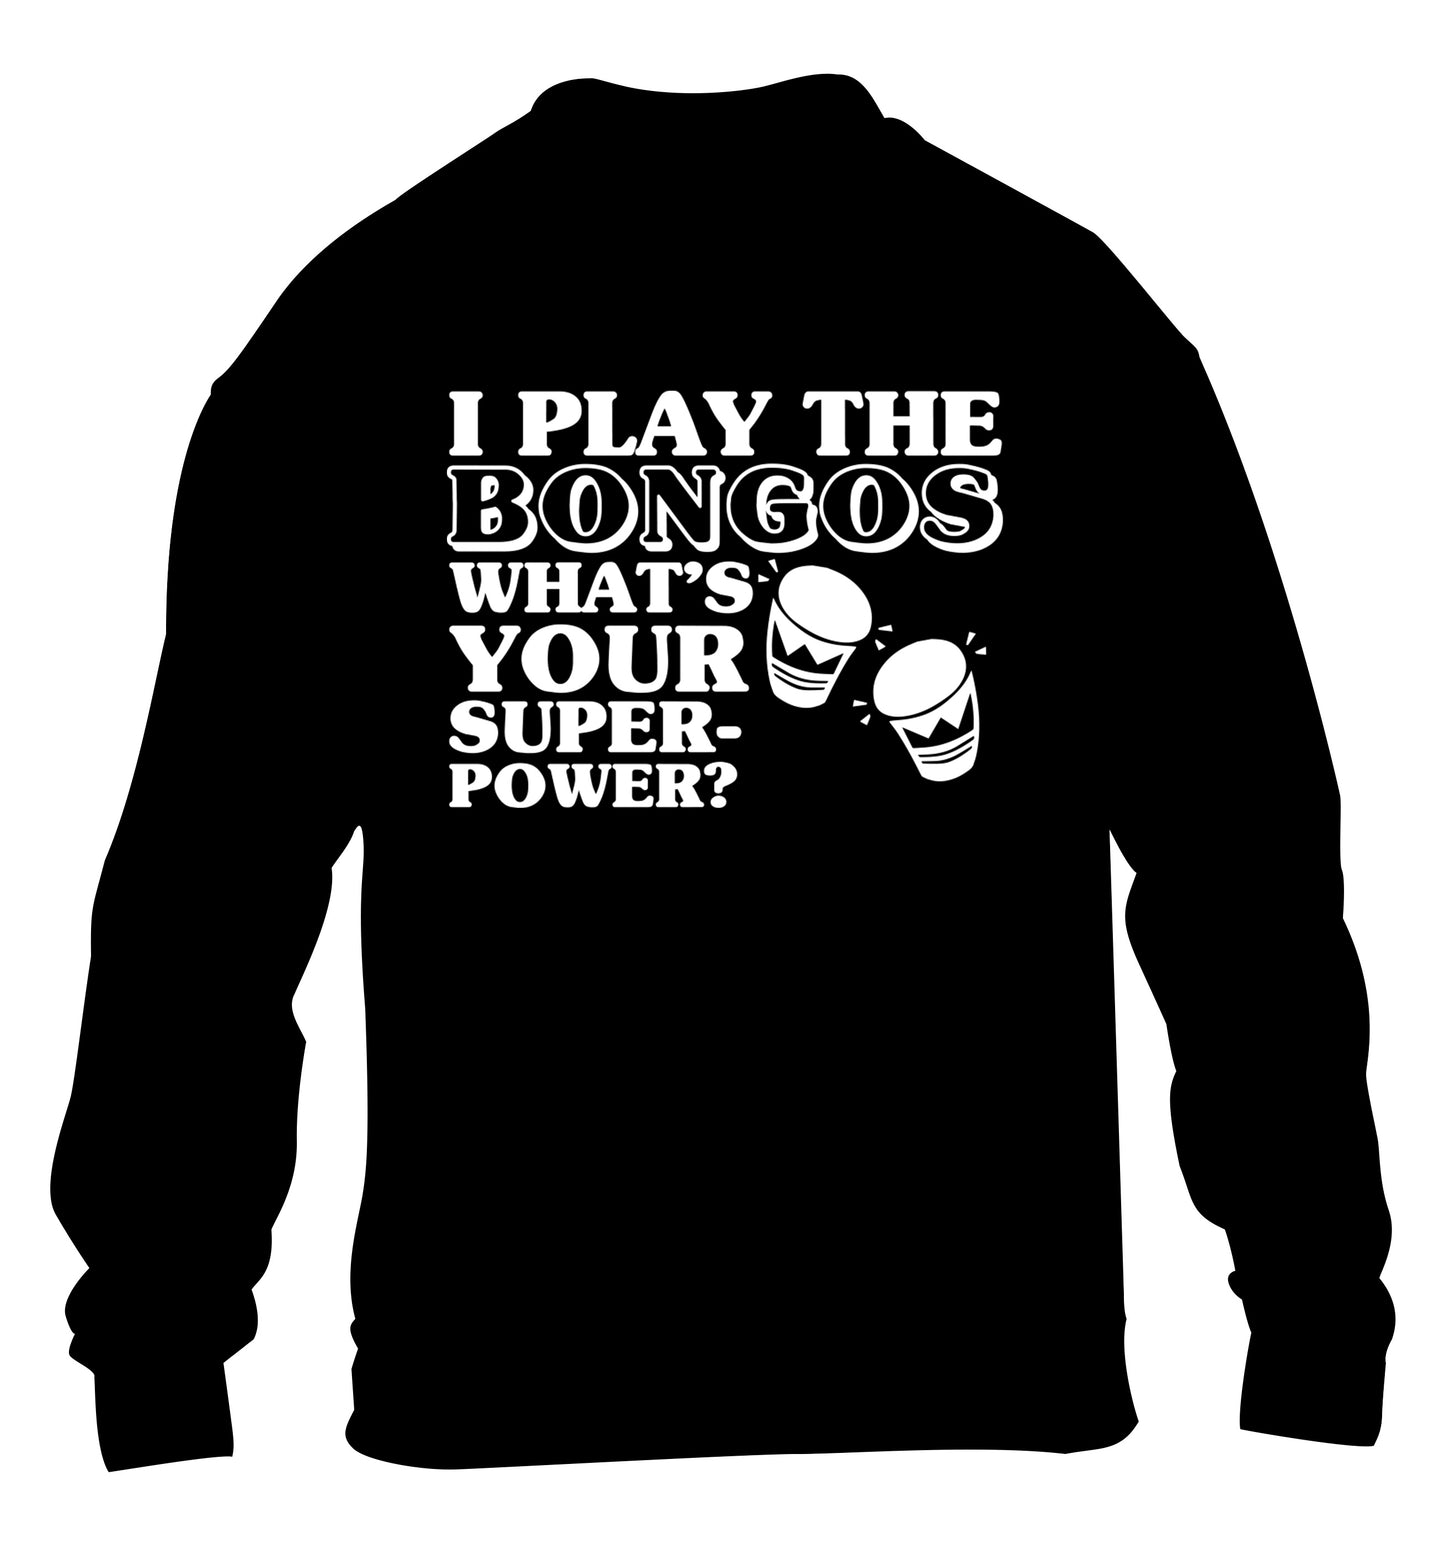 I play the bongos what's your superpower? children's black sweater 12-14 Years